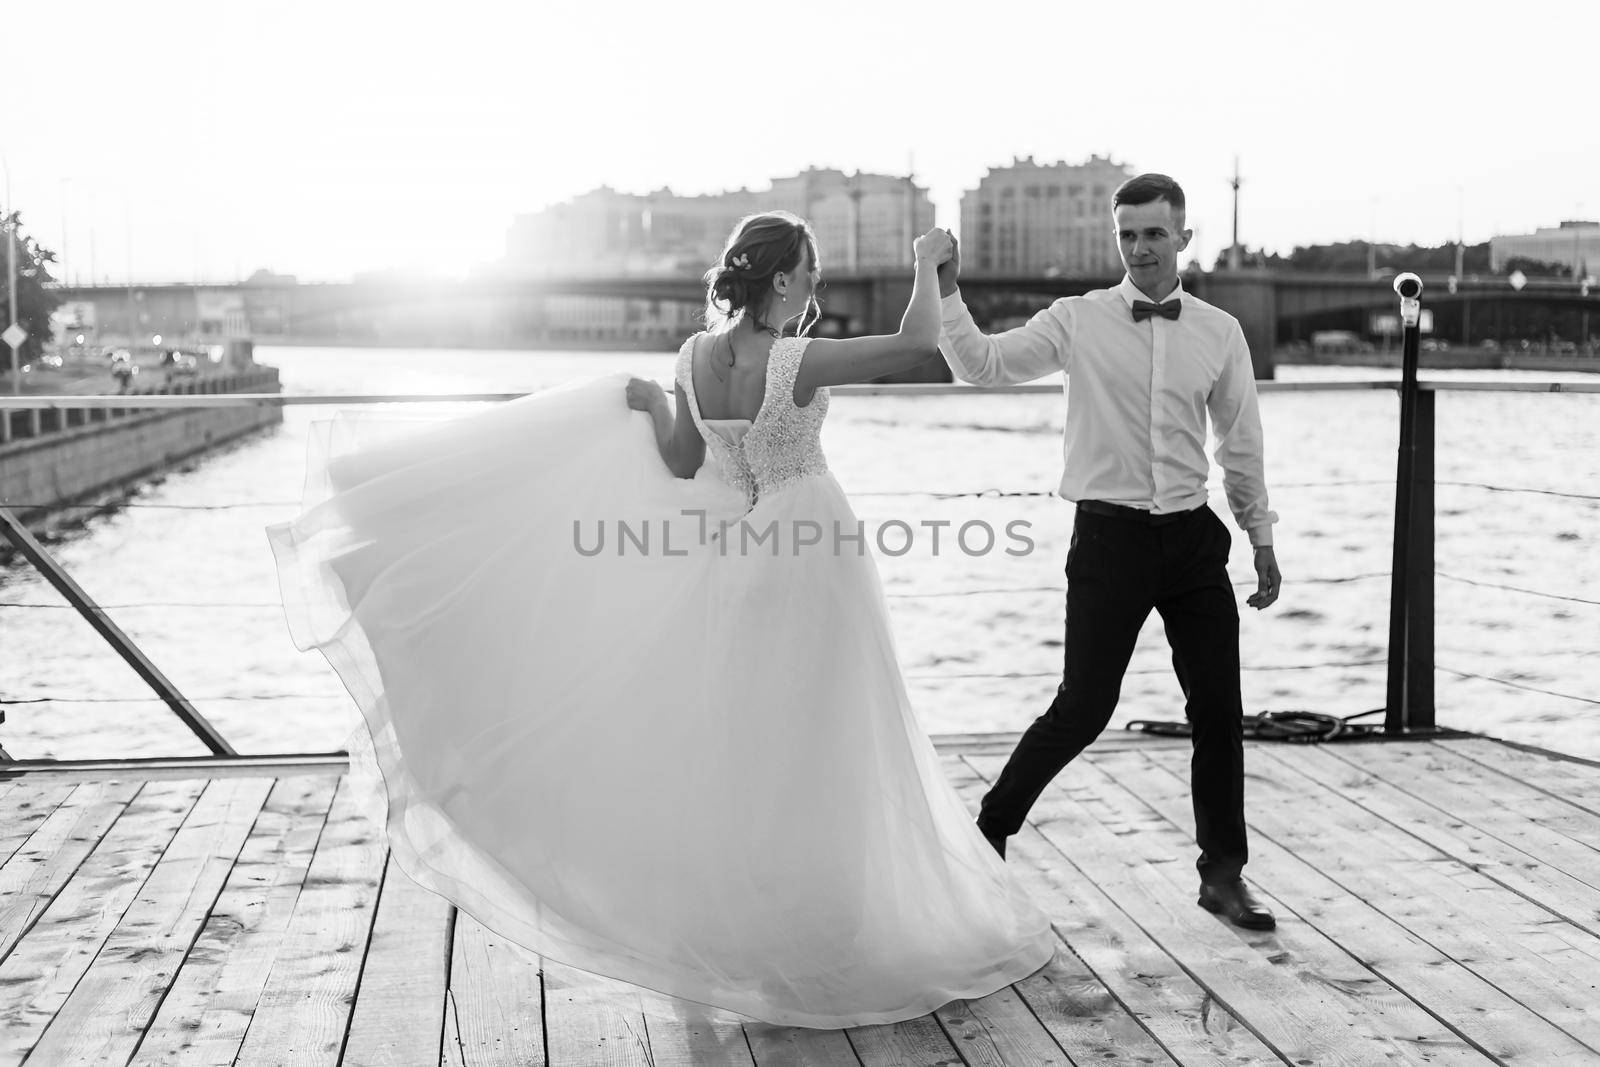 The dance of the bride and groom. Wedding article. A happy couple. Love. Photos for printed products. by alenka2194